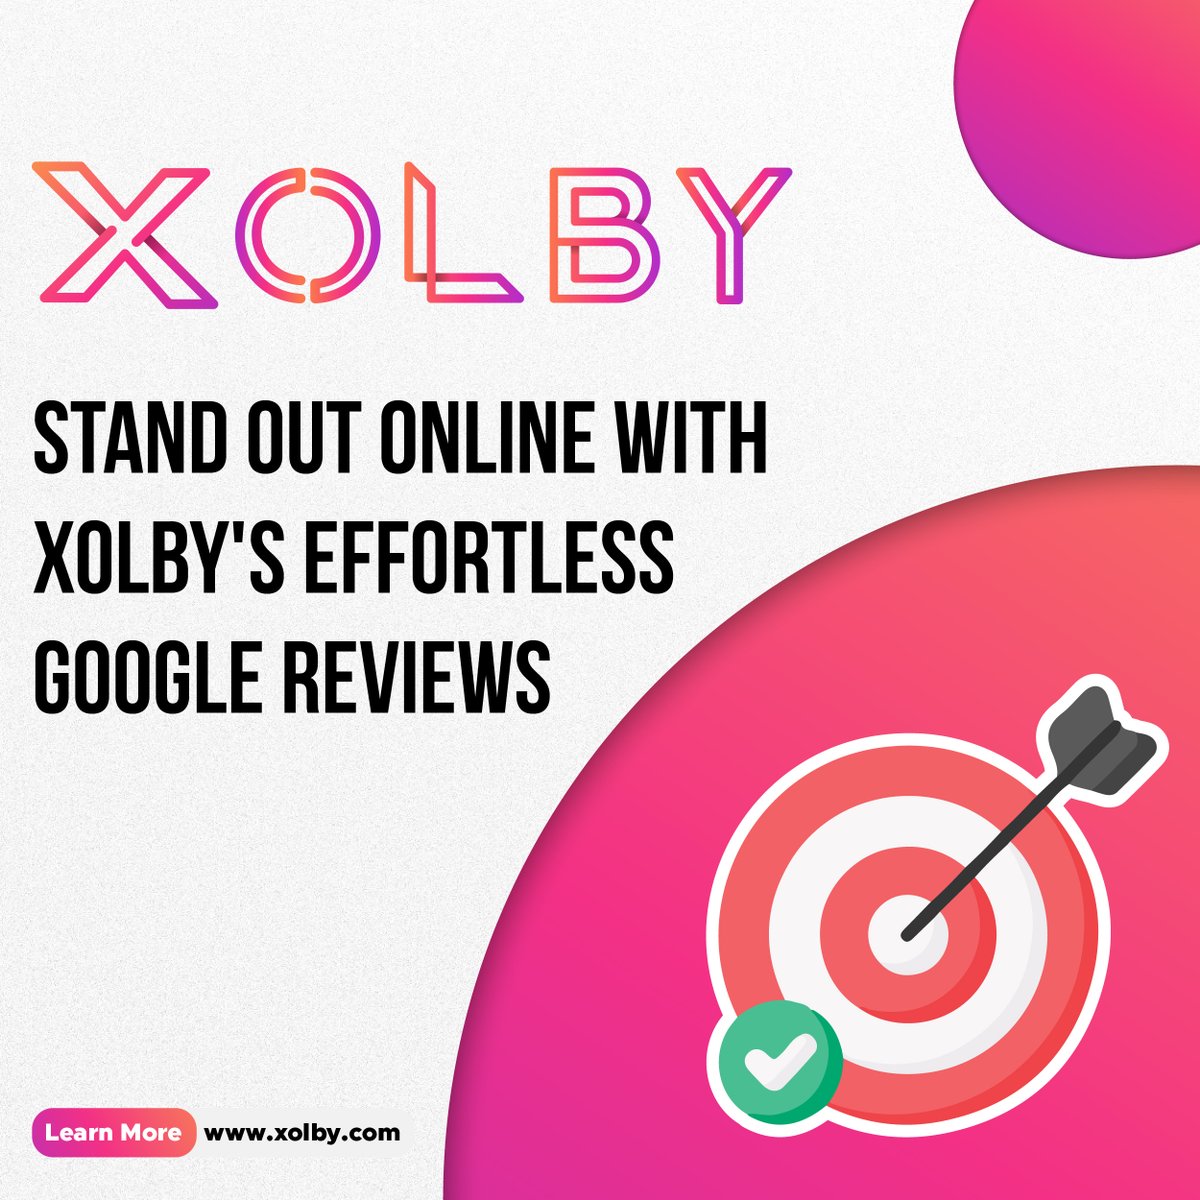 Stand out online with XOLBY's effortless Google reviews. It's the perfect way to boost your online presence and attract more customers. #GoogleReviews #XOLBY #TimeManagement #MeetingScheduling #AIAssistance #EfficiencyBoost #ProductivityTools #SmartScheduling #AIPlanning